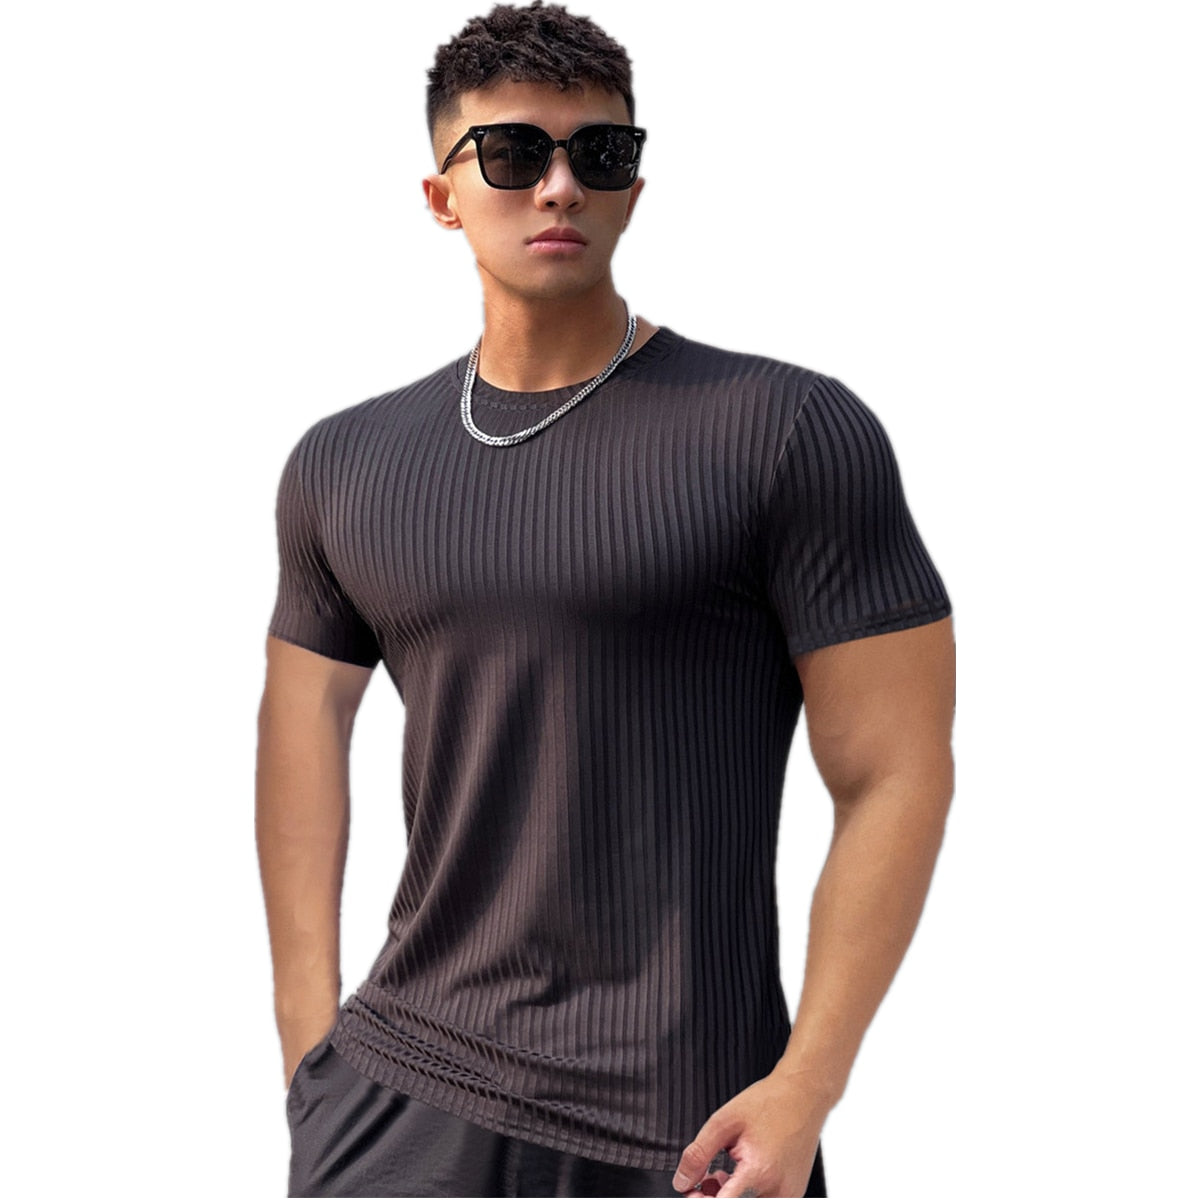 Summer Fitness T-shirt Men Casual Short Sleeve Shirt Male Gym Bodybuilding Skinny Tees Tops Running Sport Quick Dry Clothing